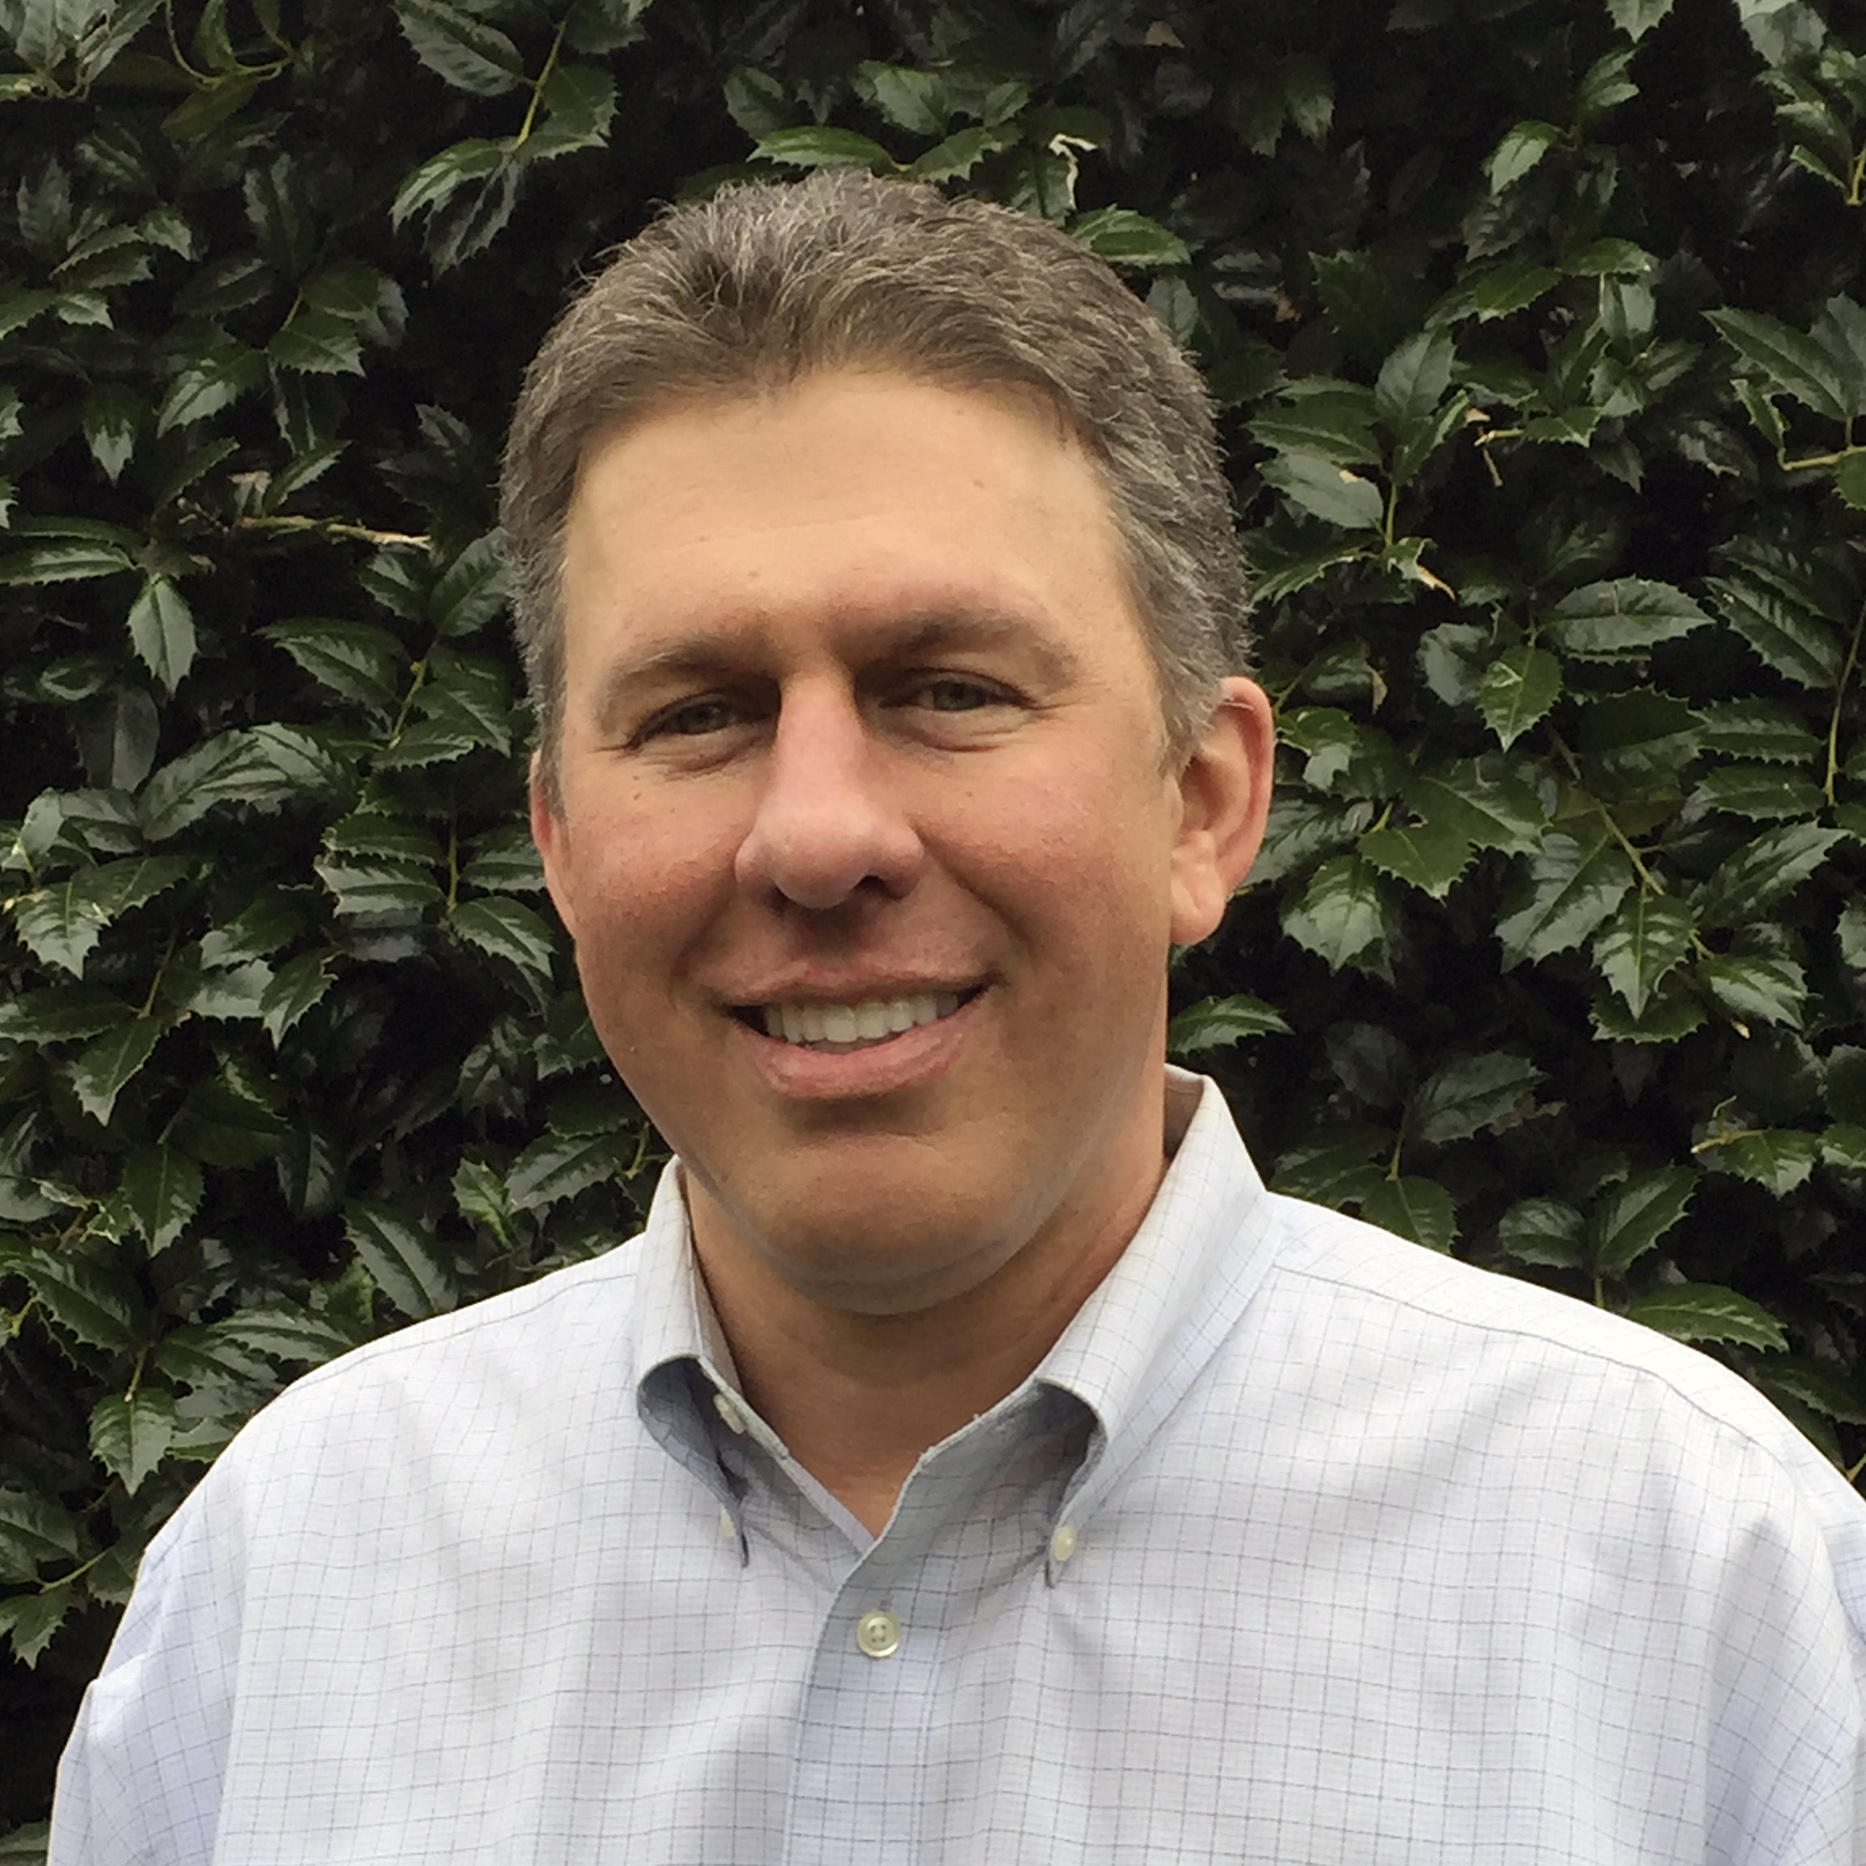 ATI Decorative Laminates Appoints New Midwest Regional Sales Manager